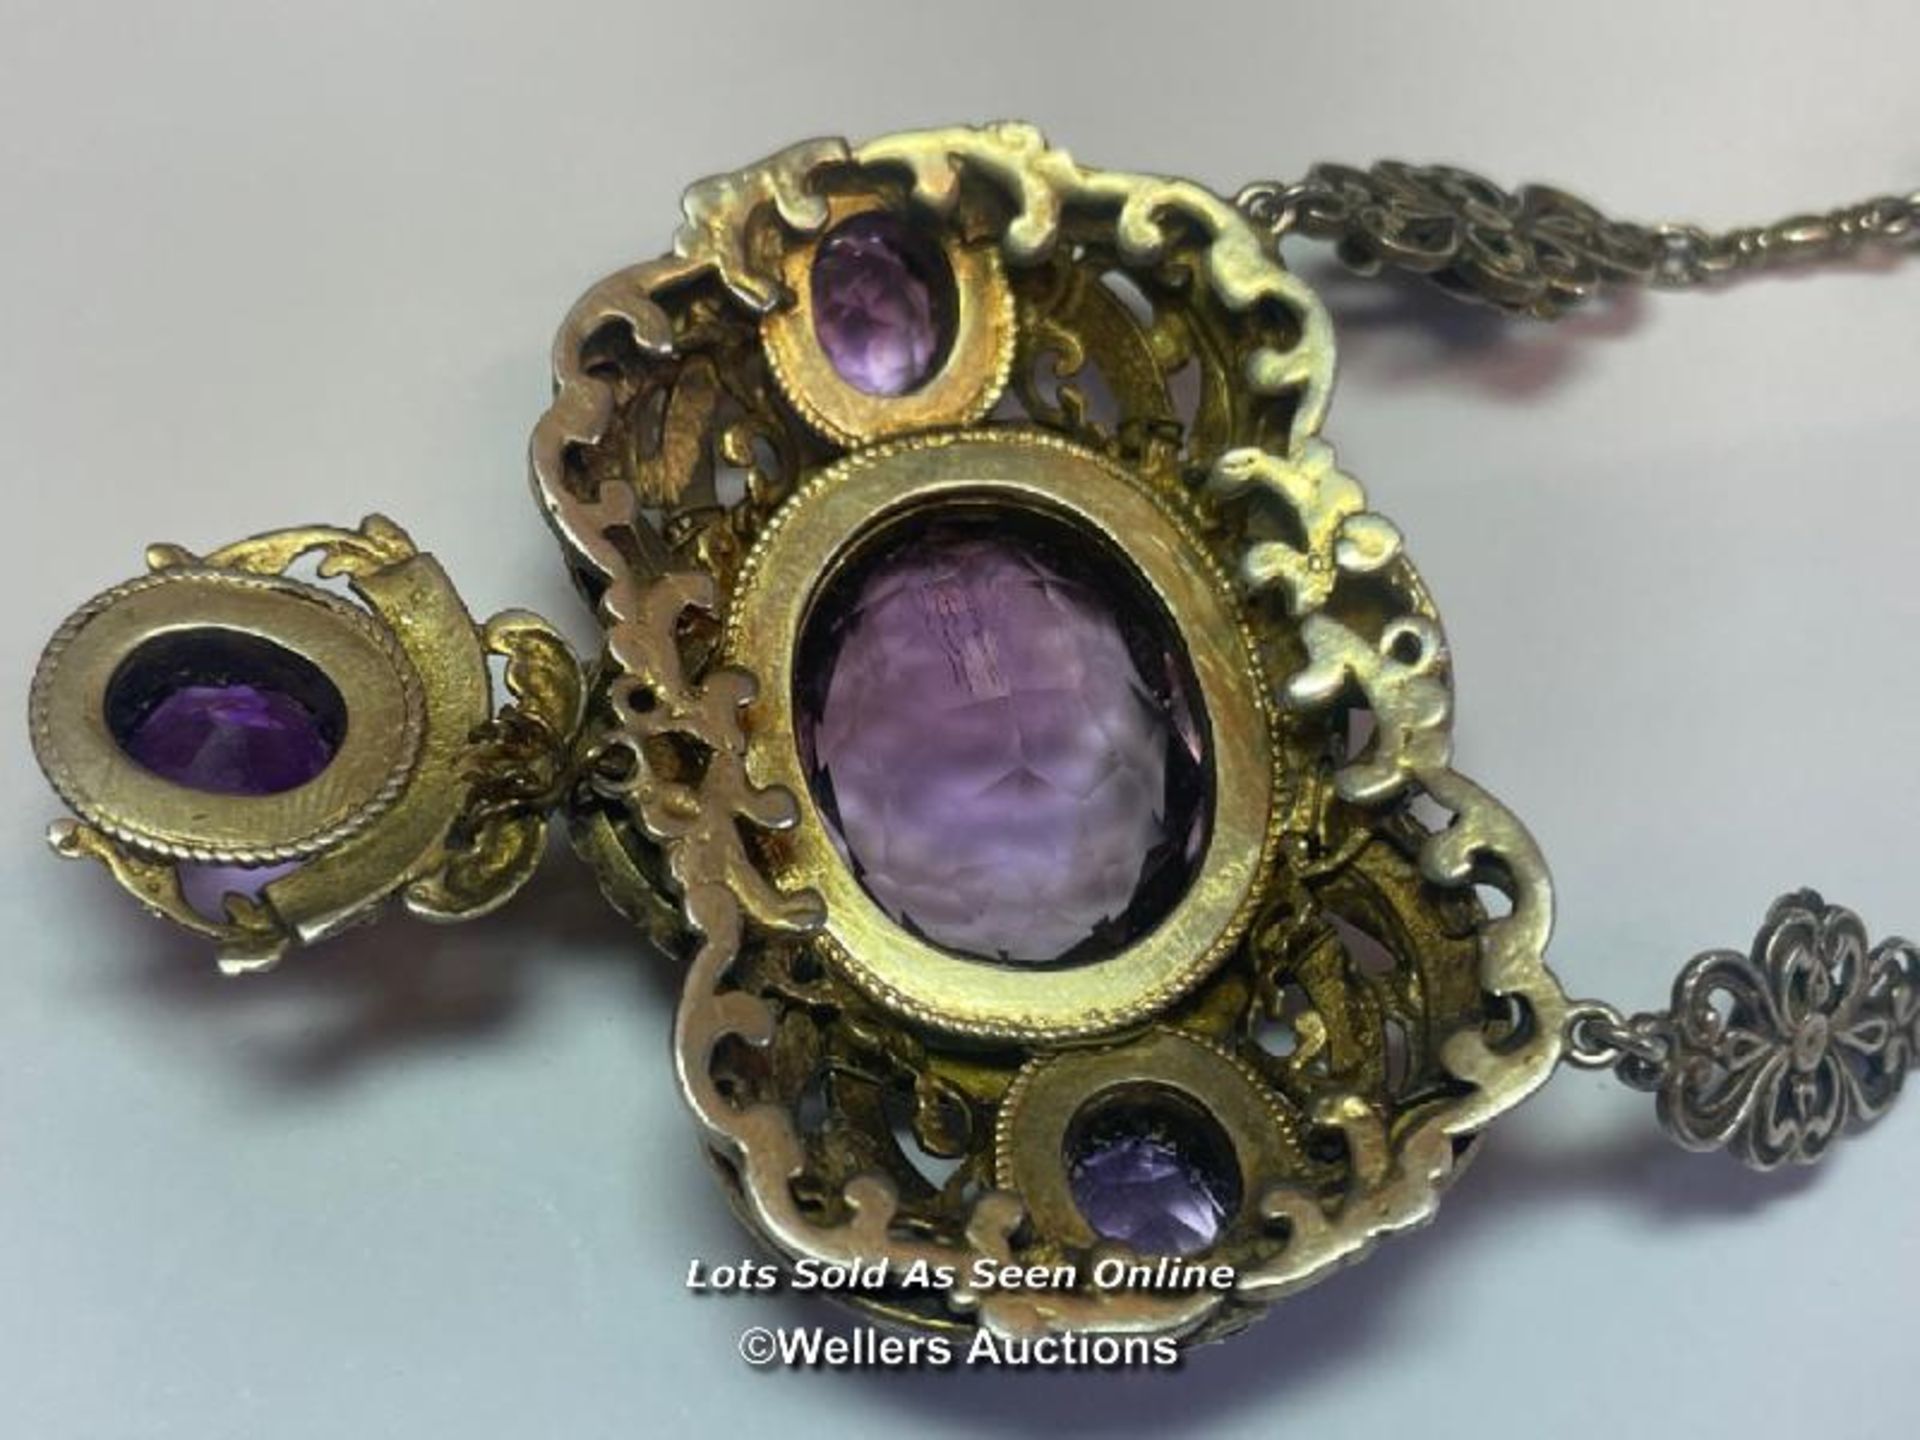 MATCHING NECKLACE & BRACELET WITH AMETHYSTS AND SEED PEARLS, CENTRAL AMETHYST MEASURES 13.5MM X 8. - Image 3 of 6